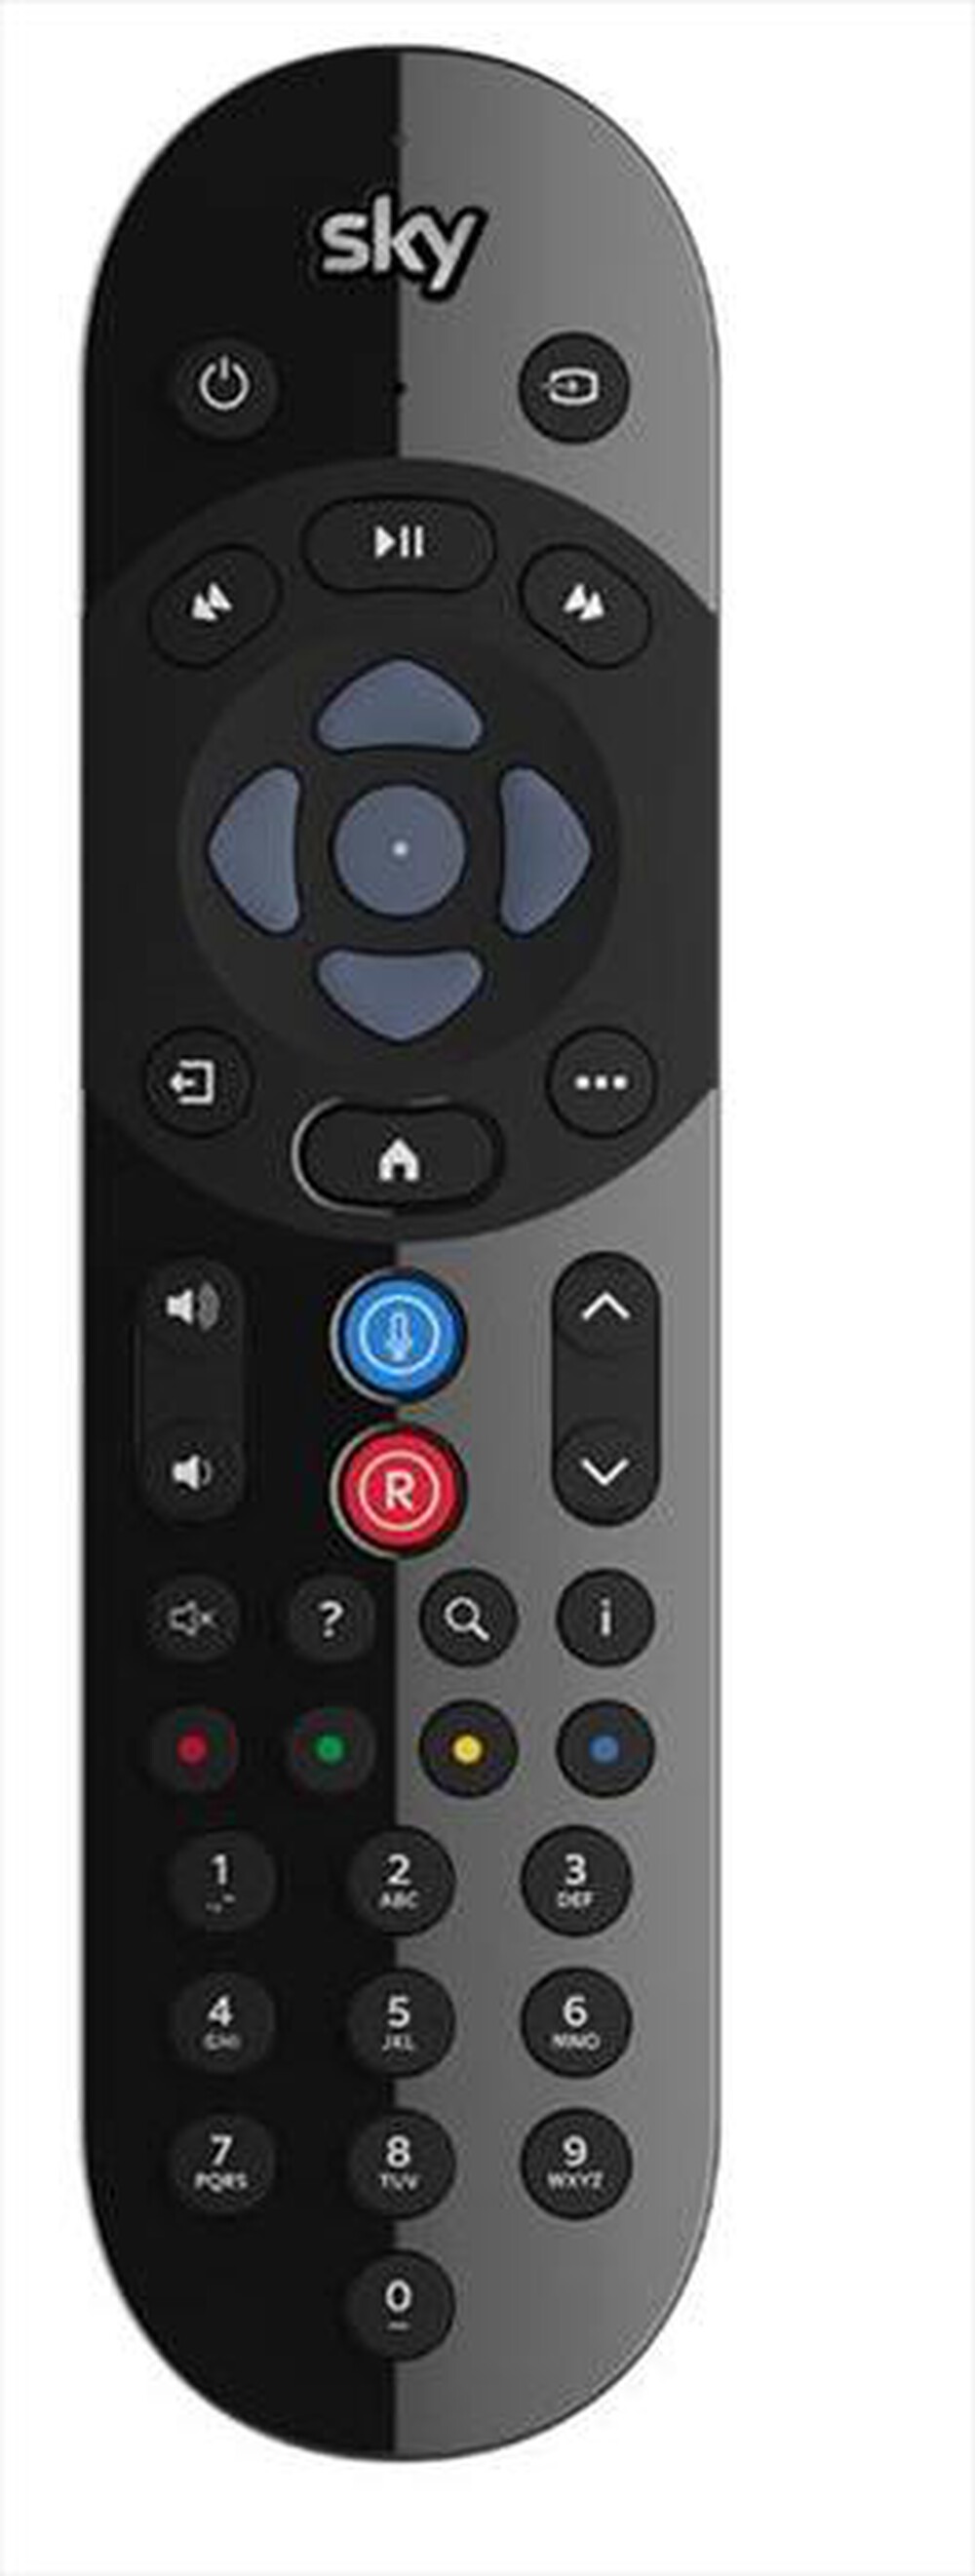 "ONE FOR ALL - SKY Q 735-NERO"